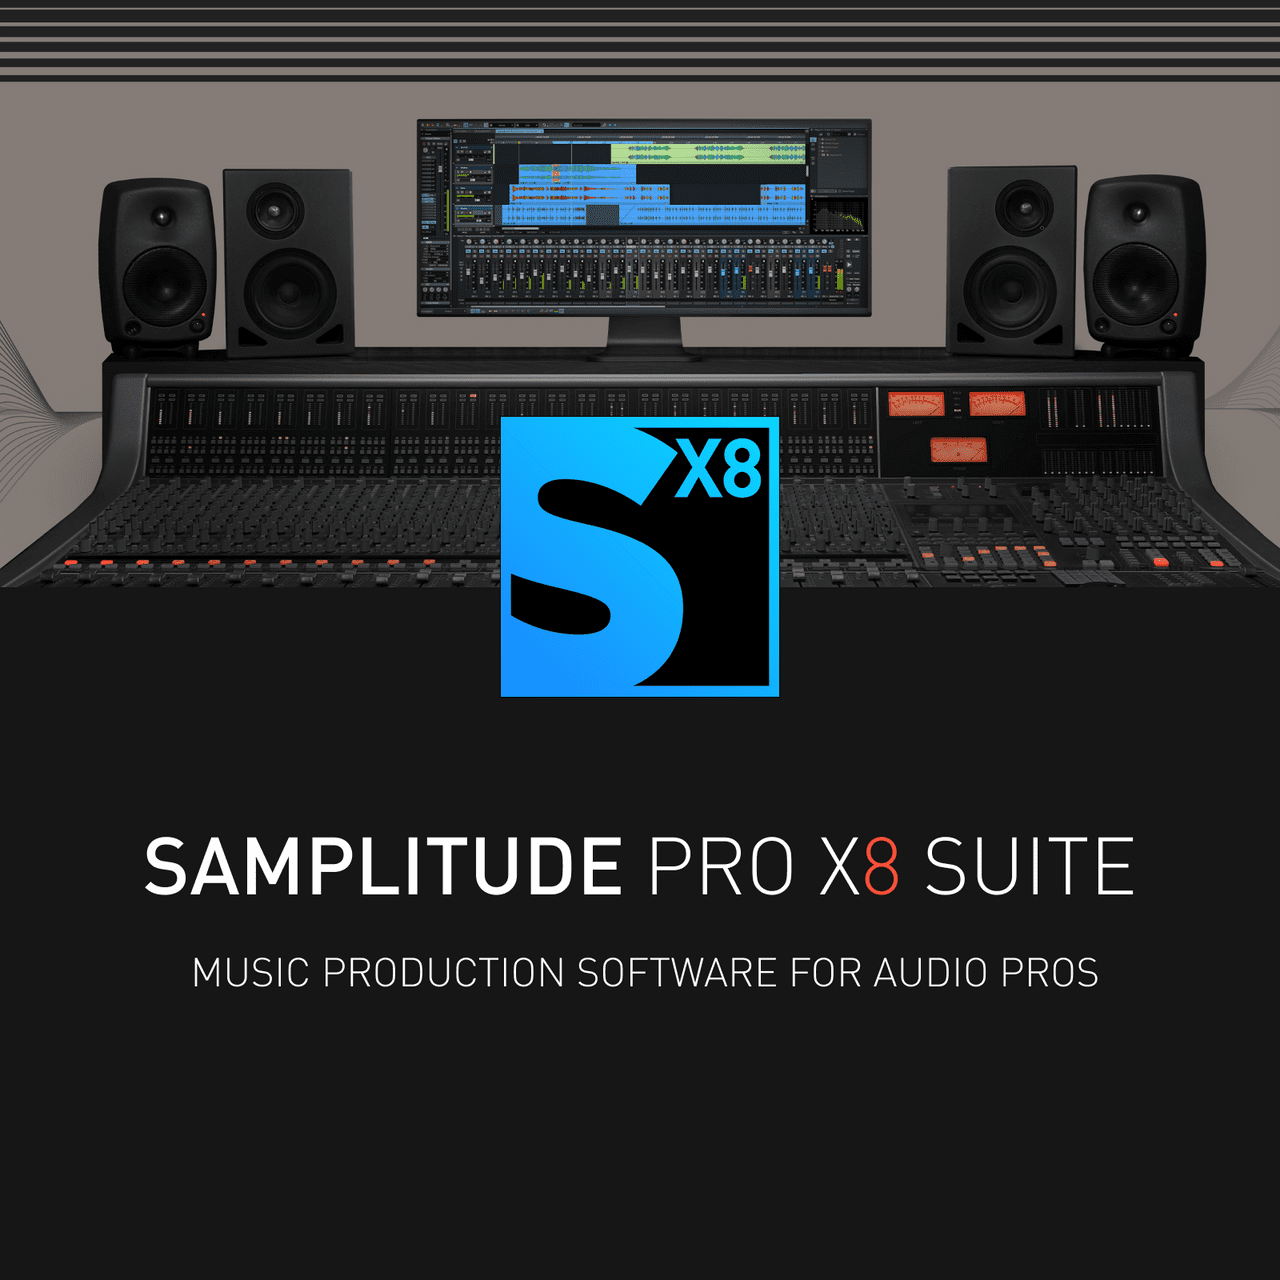 Image of 'Samplitude Pro X8 Suite' software package by MAGIX with crack for download.